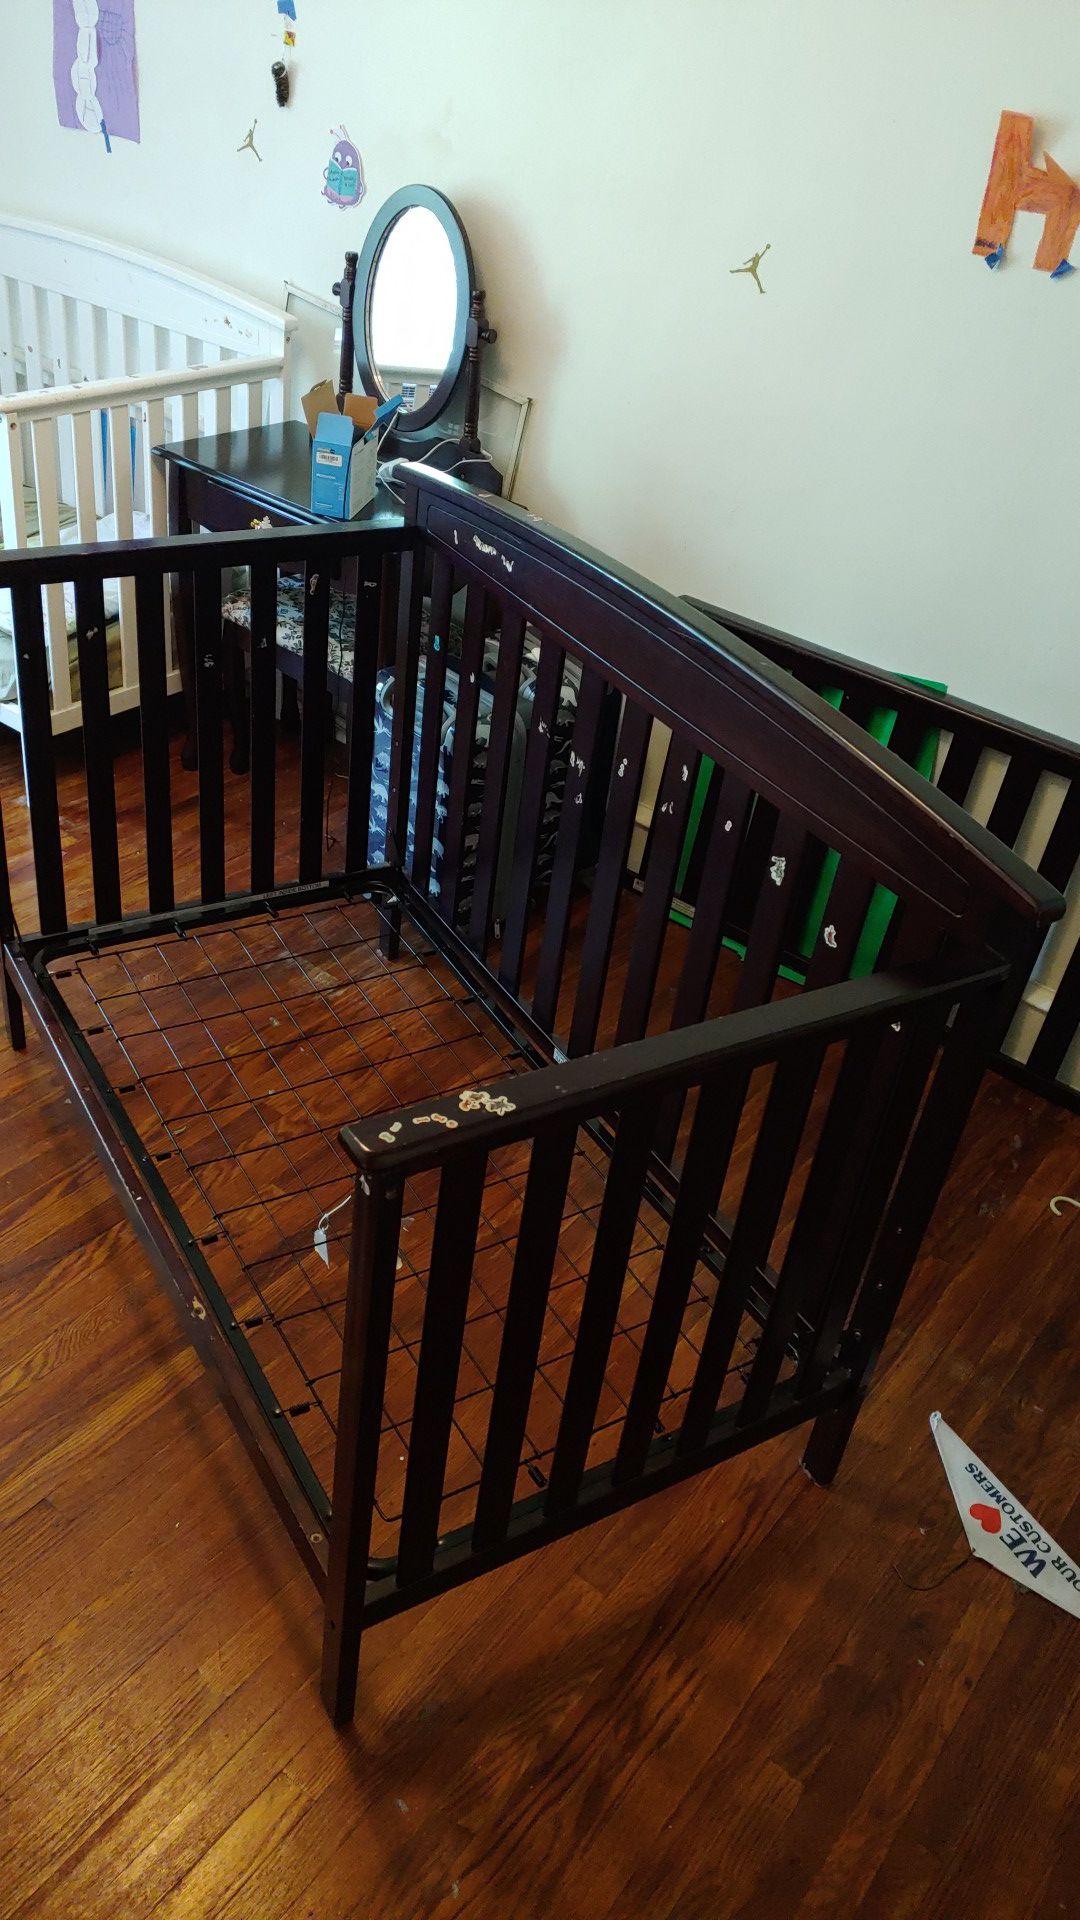 2 Baby crib turning to bed (1 to 6 years old)